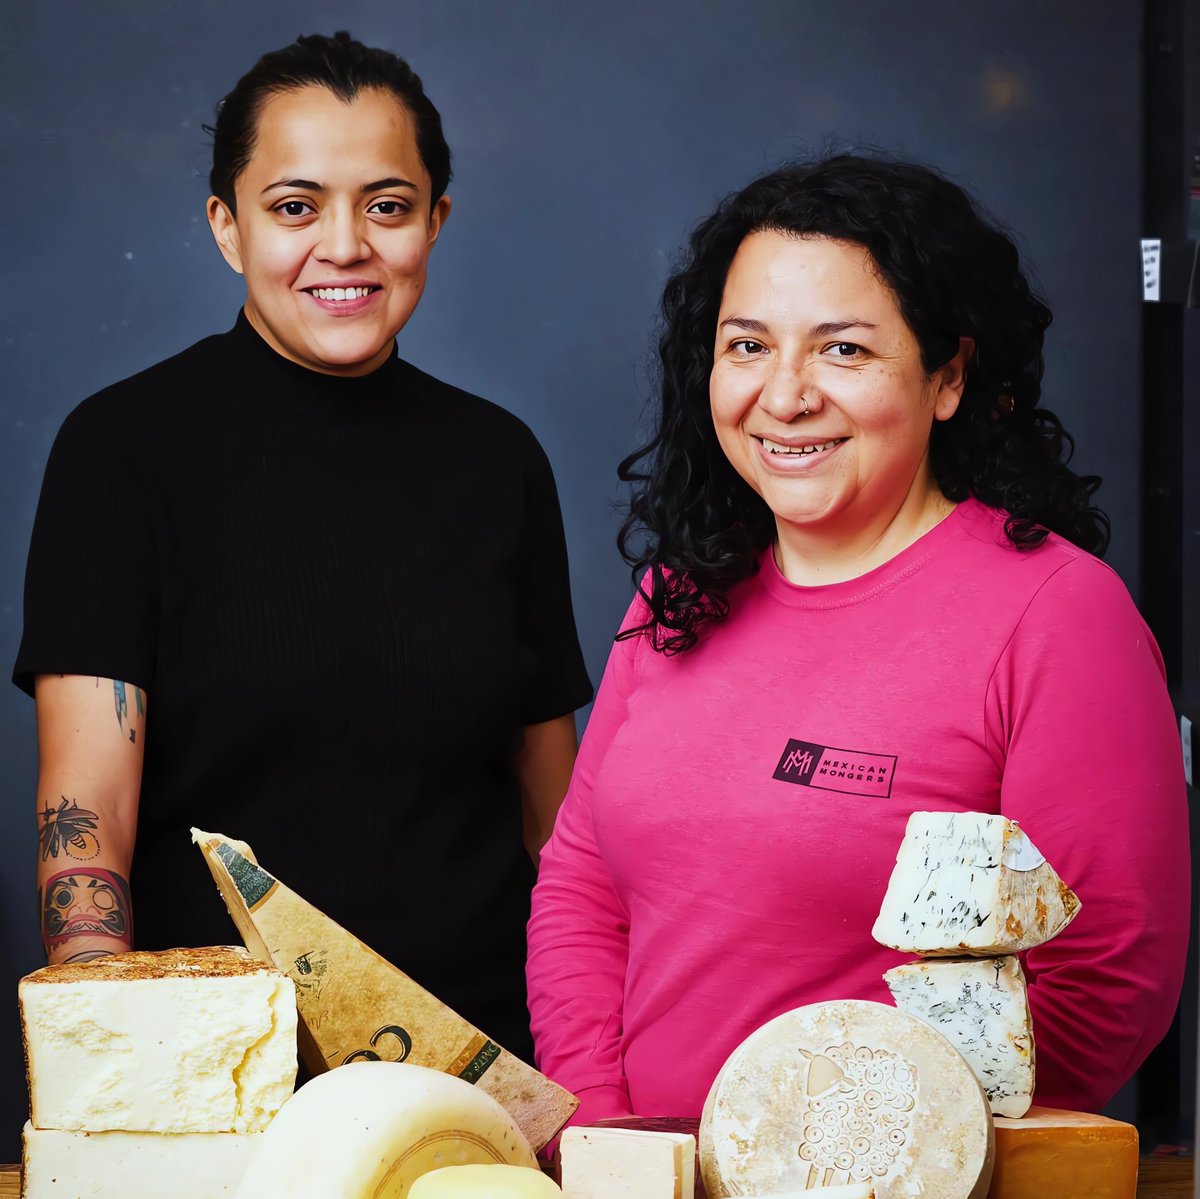 Cheese artistry at its finest: Lactography shines as Mexico City's farmstead maestro! 🎨🧀 #thecheeseprofessor #cheese  

Click the Link in Our Bio for More!

Story by RACHAEL NARINS
@rachael_narins
@ChickswKnives 
@Lactography  

cheeseprofessor.com/blog/lactograp…